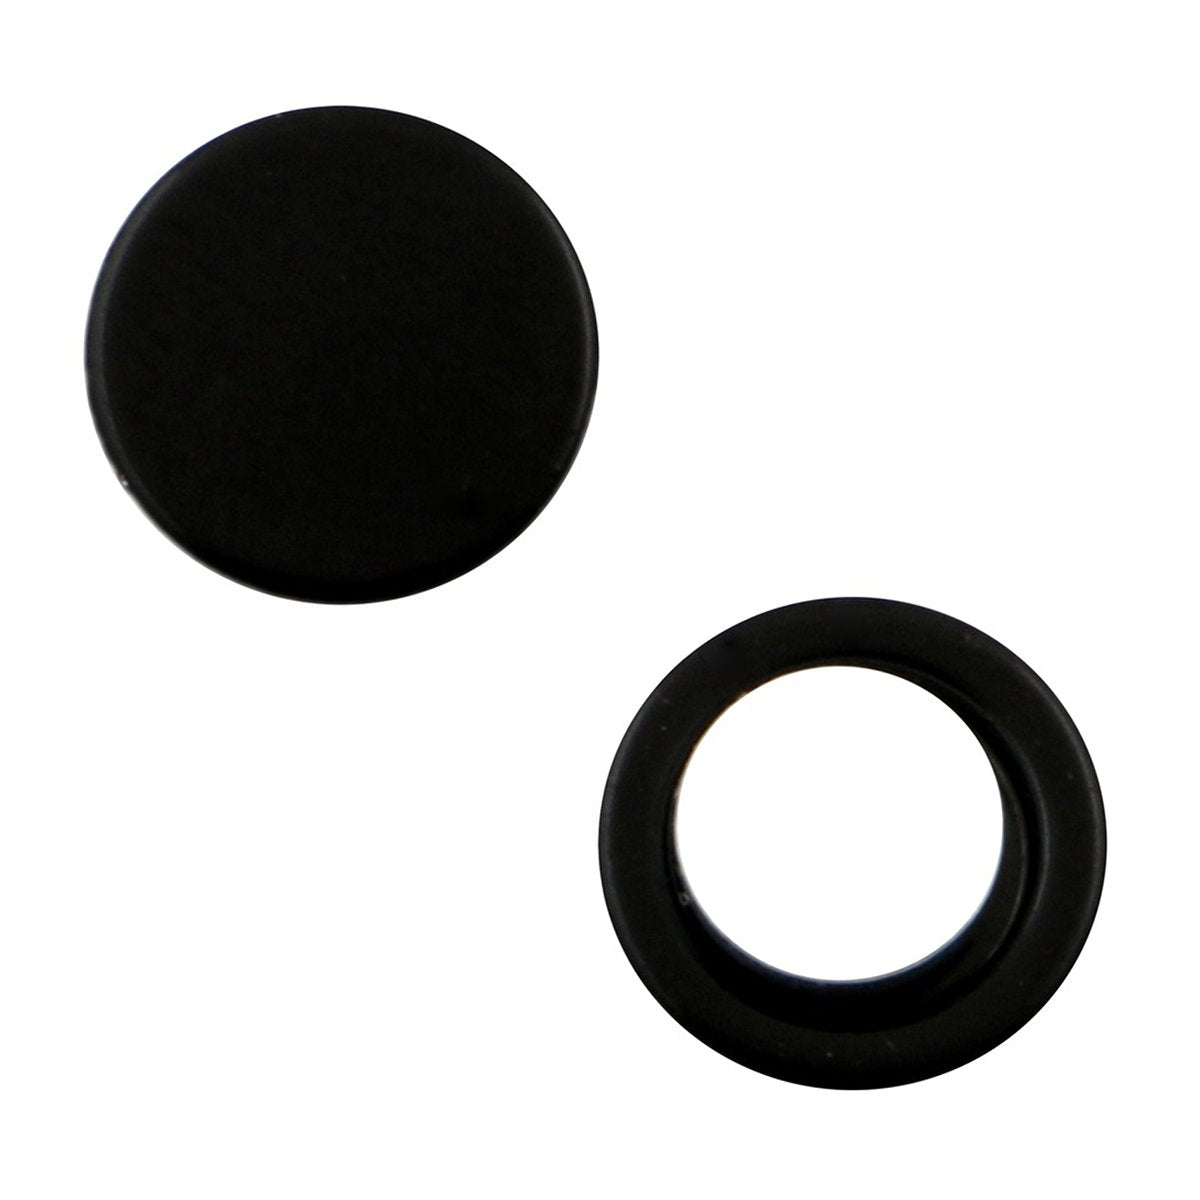 Round 7Mm Black Silver Surgical Stainless Steel Pair Stud Earring Men